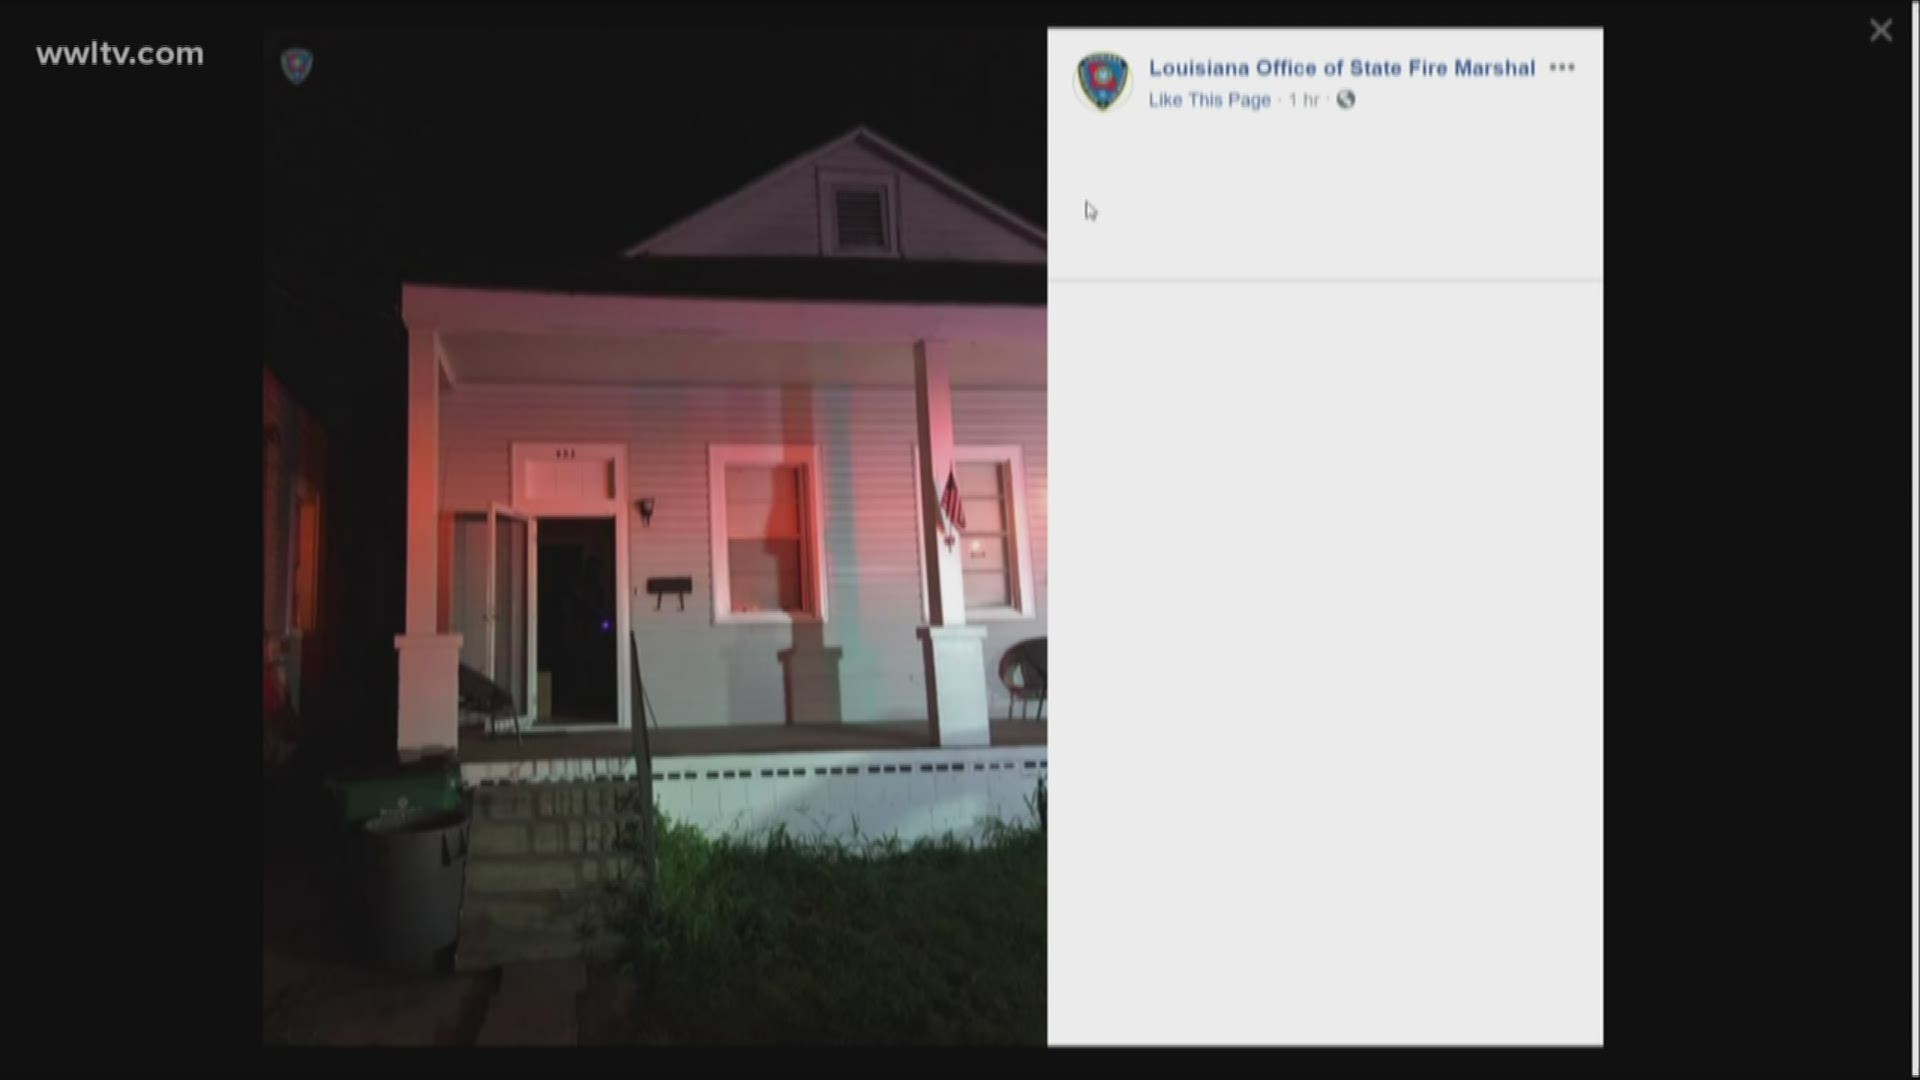 According to the Louisiana State Fire Marshal's Office, the fire was reported around 1 a.m. in the 400 block of Avenue A.